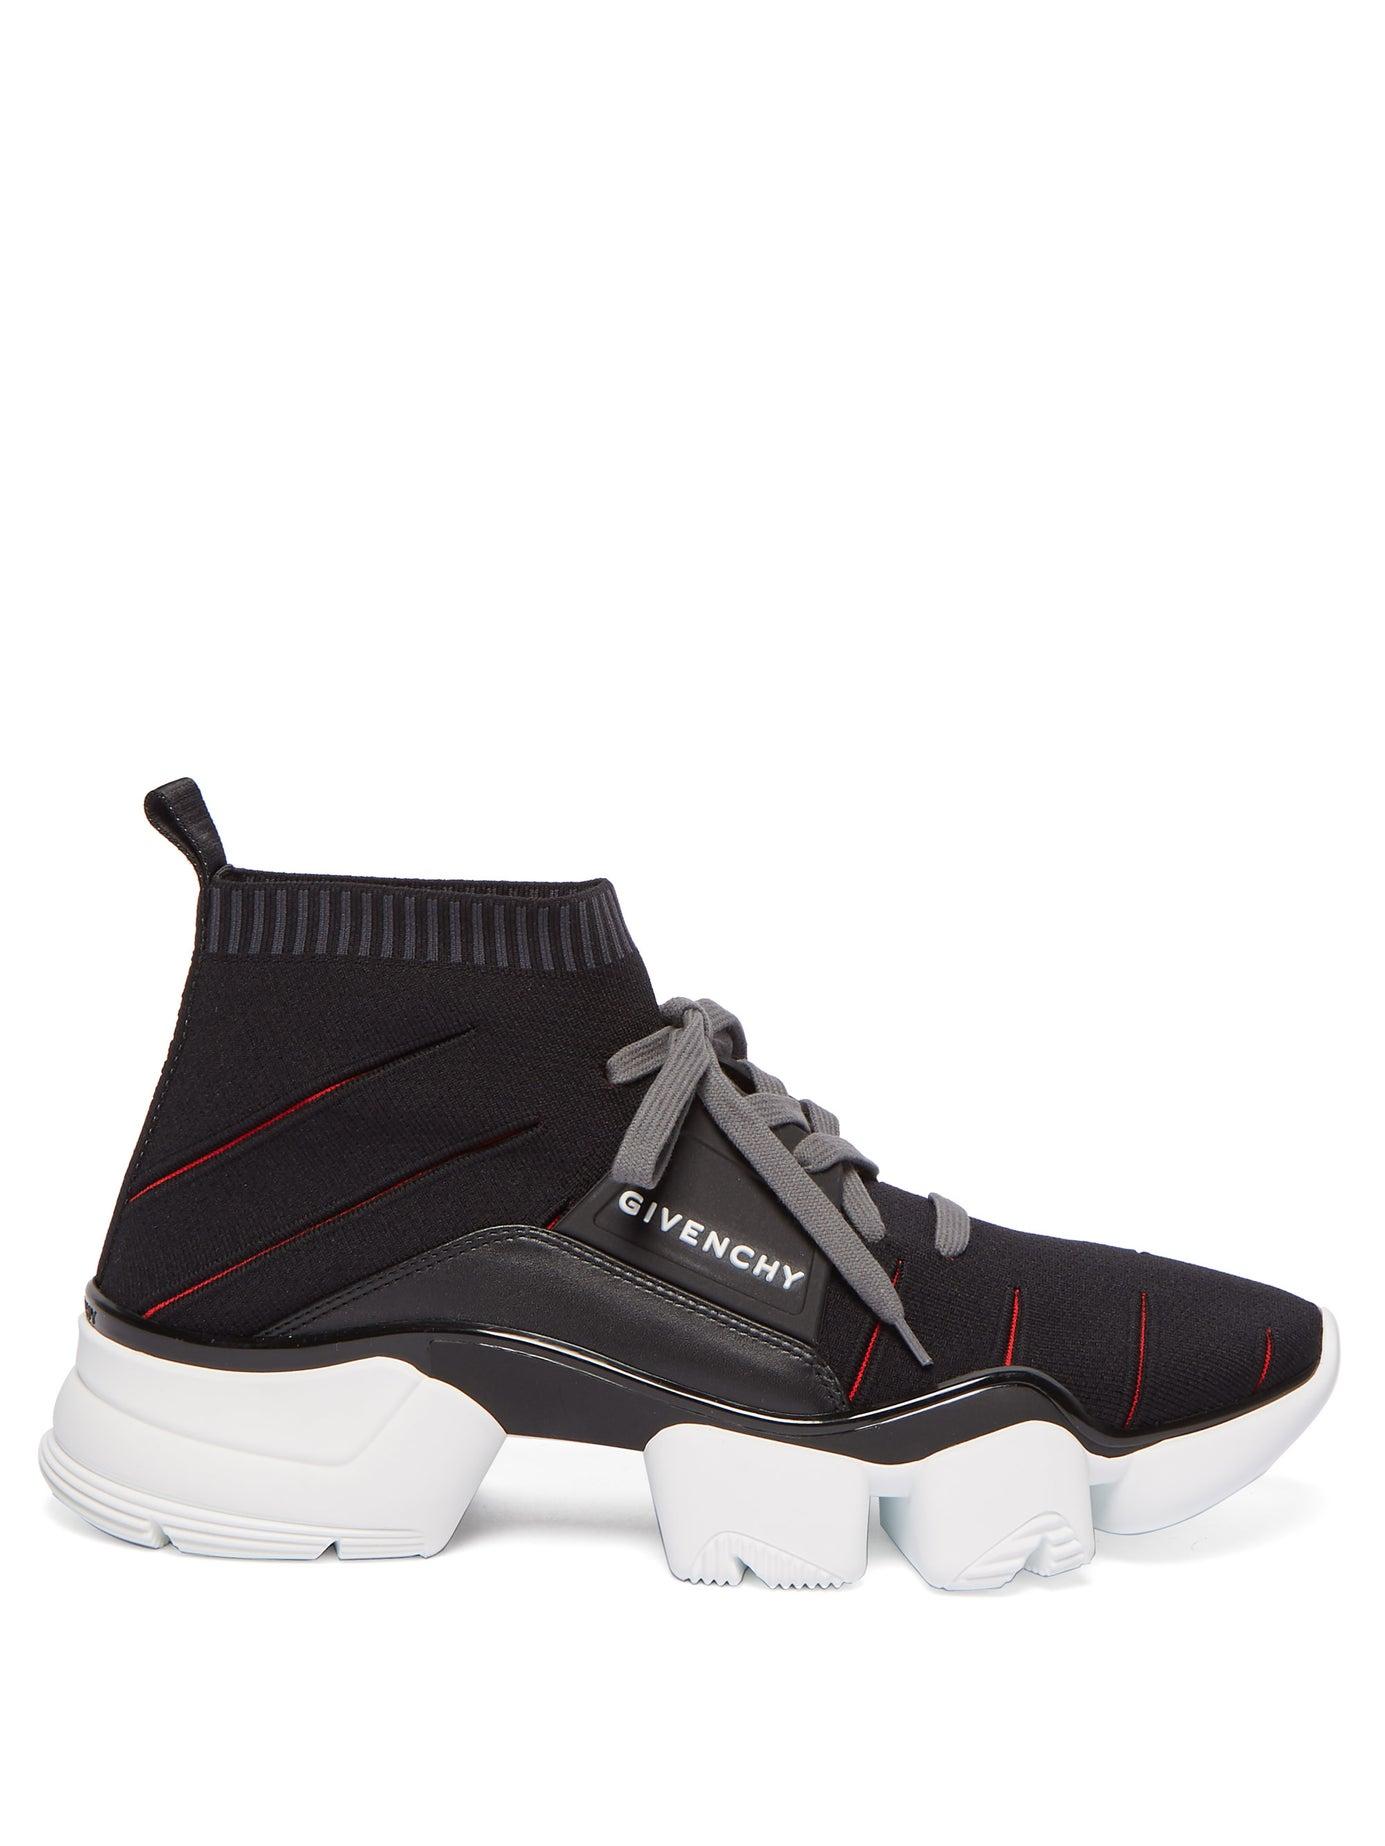 Givenchy Rubber Jaw Raised-sole Sock 